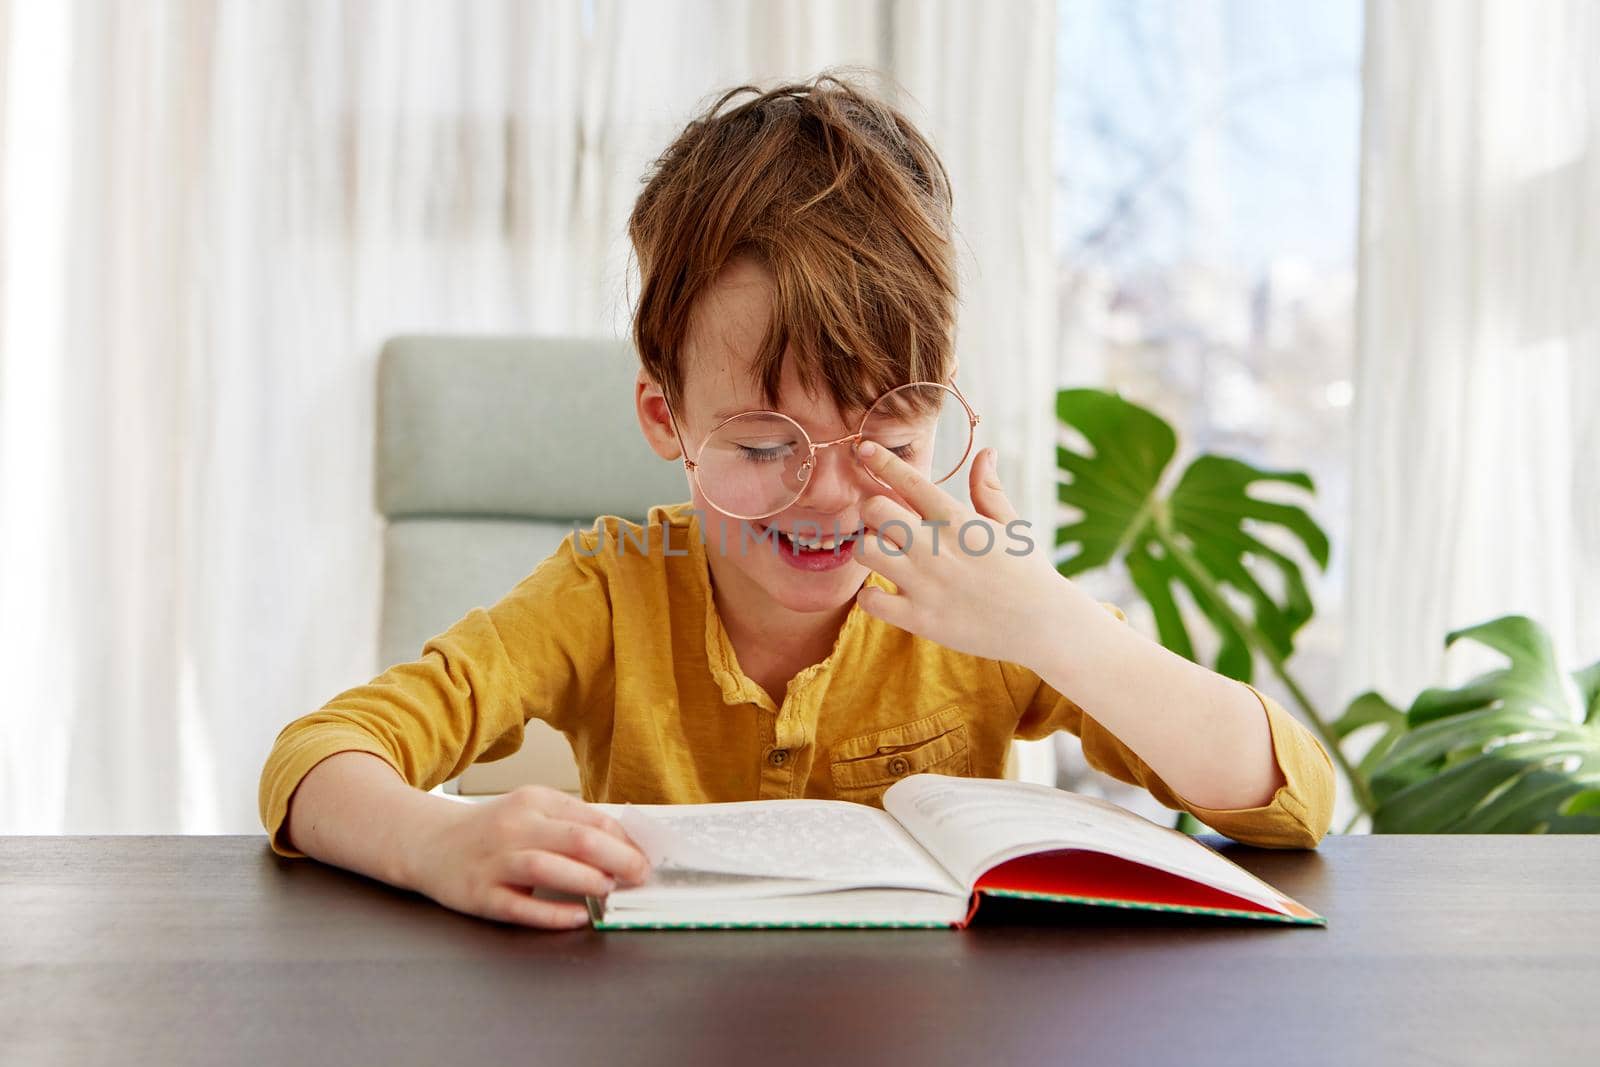 Cute little student in yellow shirt adjusting glasses and smiling while sitting at table and reading book during studies in daytime at home